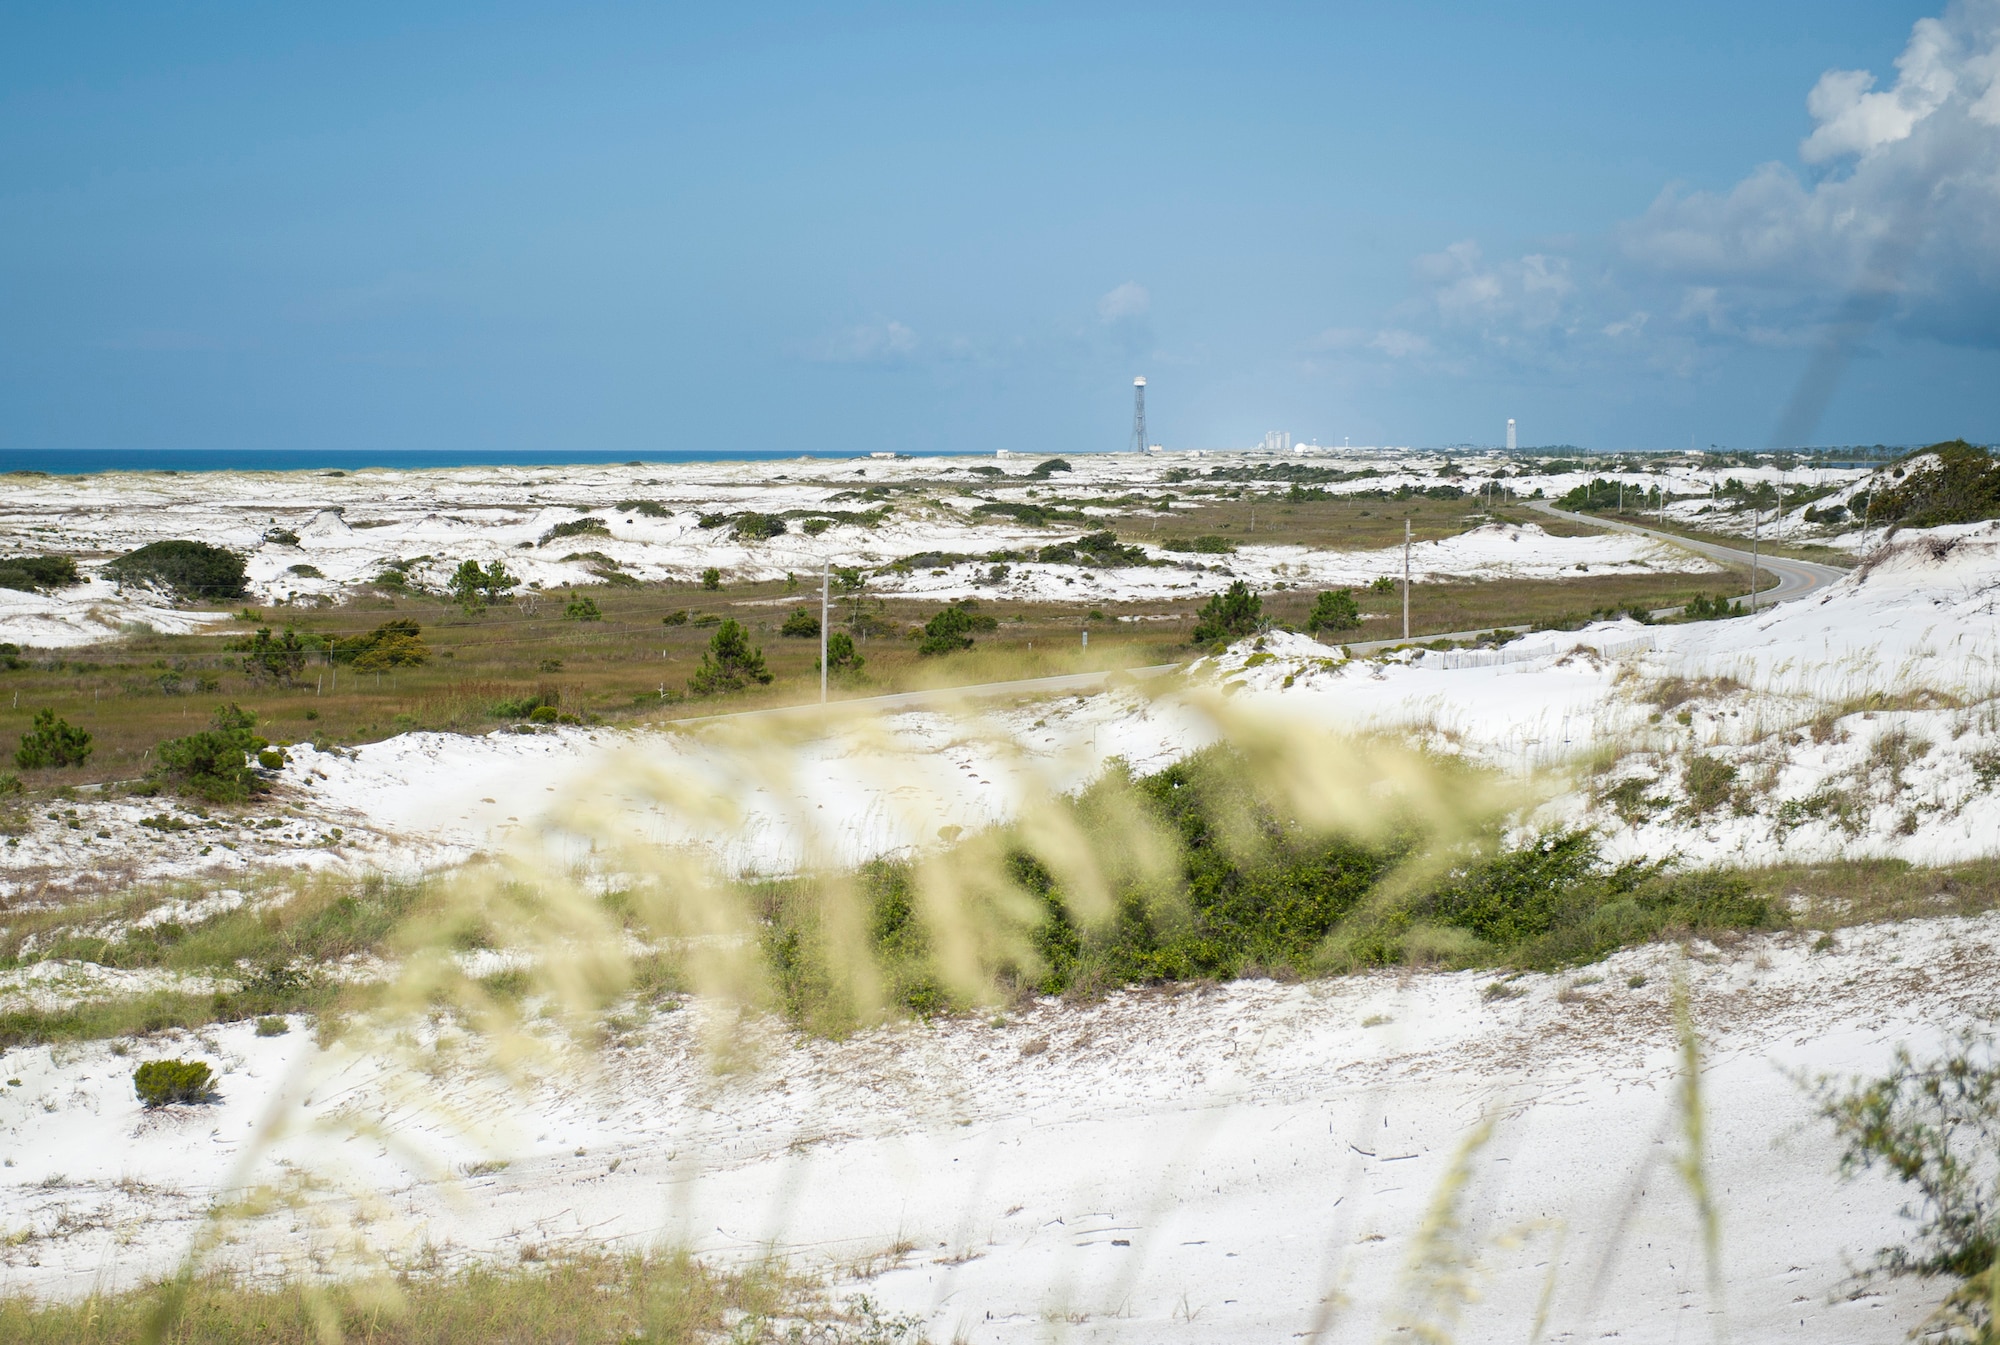 A view of the Santa Rosa Island Range July 14 at Eglin Air Force Base, Fla. The Santa Rosa Island Range is 18 miles in length and used for military test and training missions. The littoral range is also a nesting ground for shorebirds and  endangered sea turtle species. (U.S. Air Force photo/Ilka Cole) 